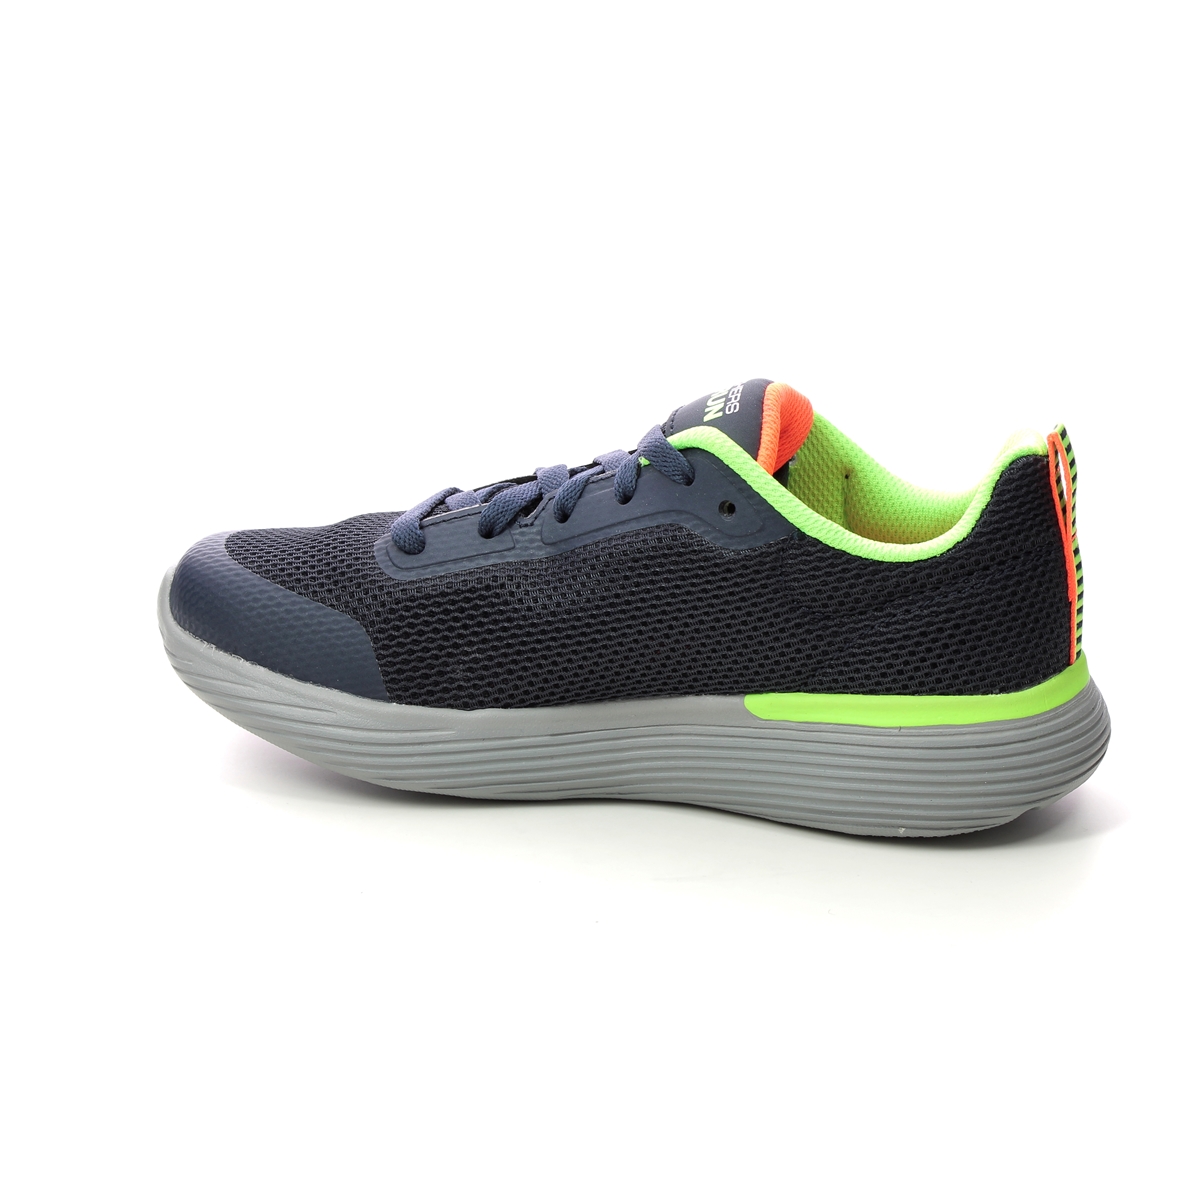 Skechers Go Run 400 Lace 405100L NVLM Navy Lime trainers